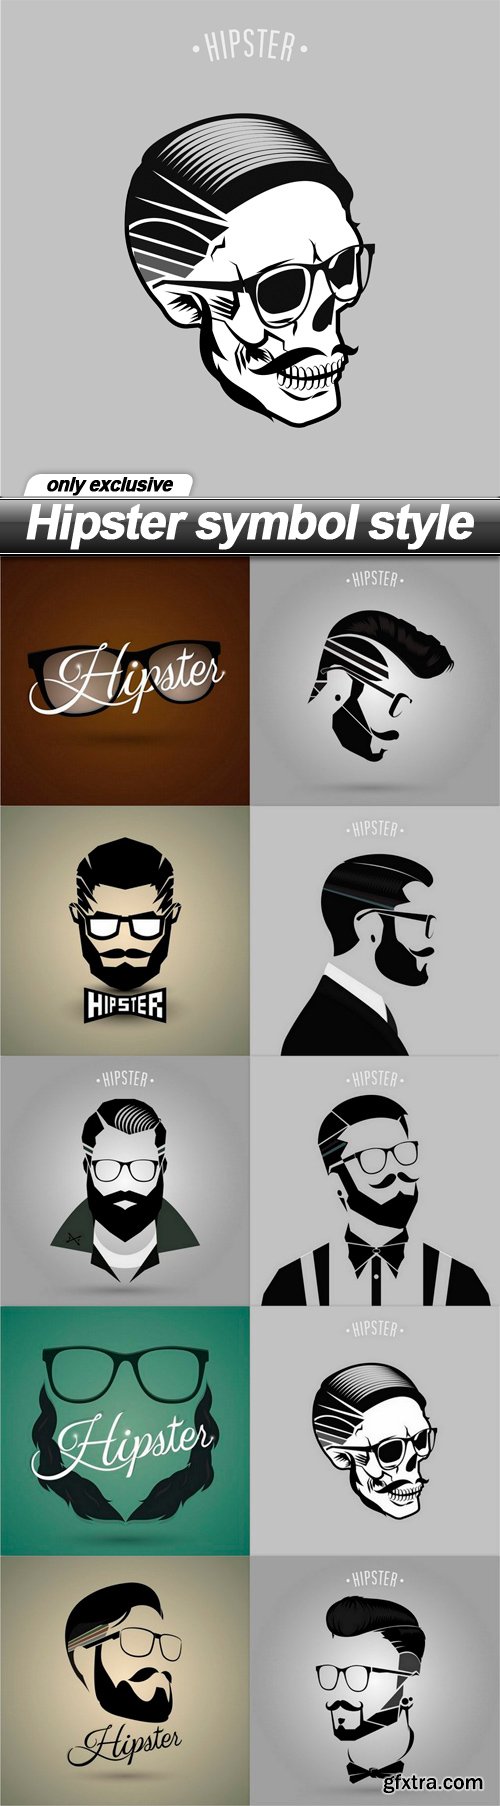 Hipster symbol style - 10 EPS